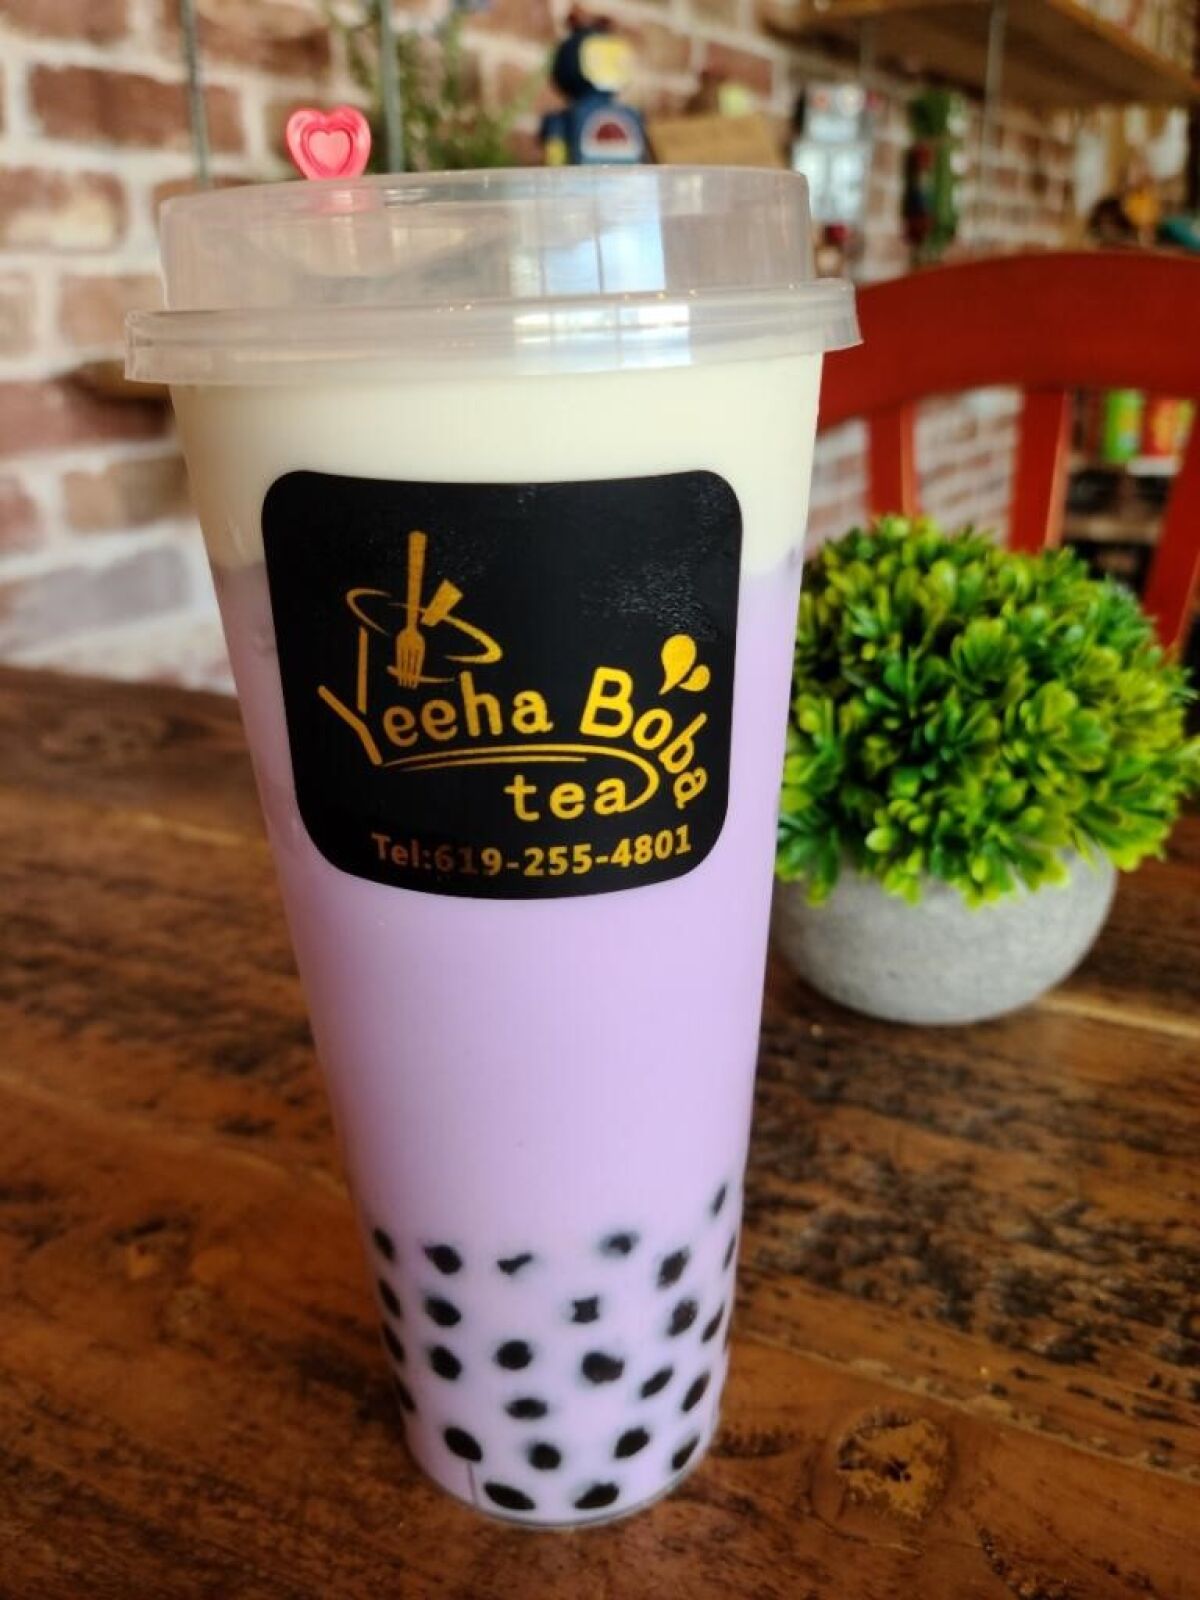 Yeeha Boba Tea's milk teas come in a variety of flavors.